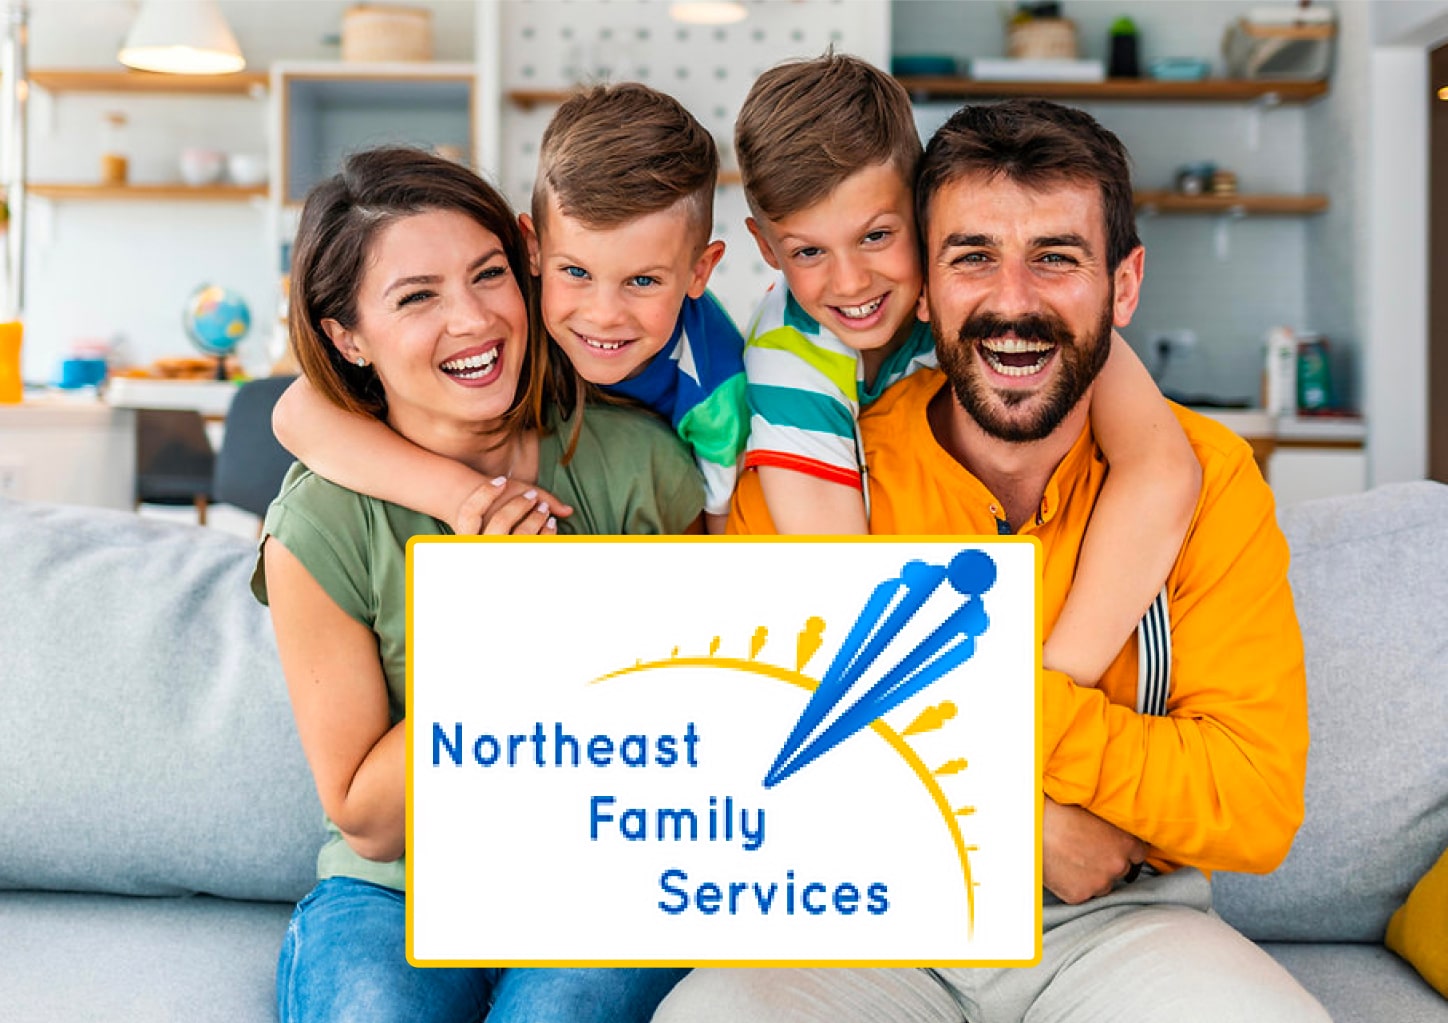 Northeast Family Services-min